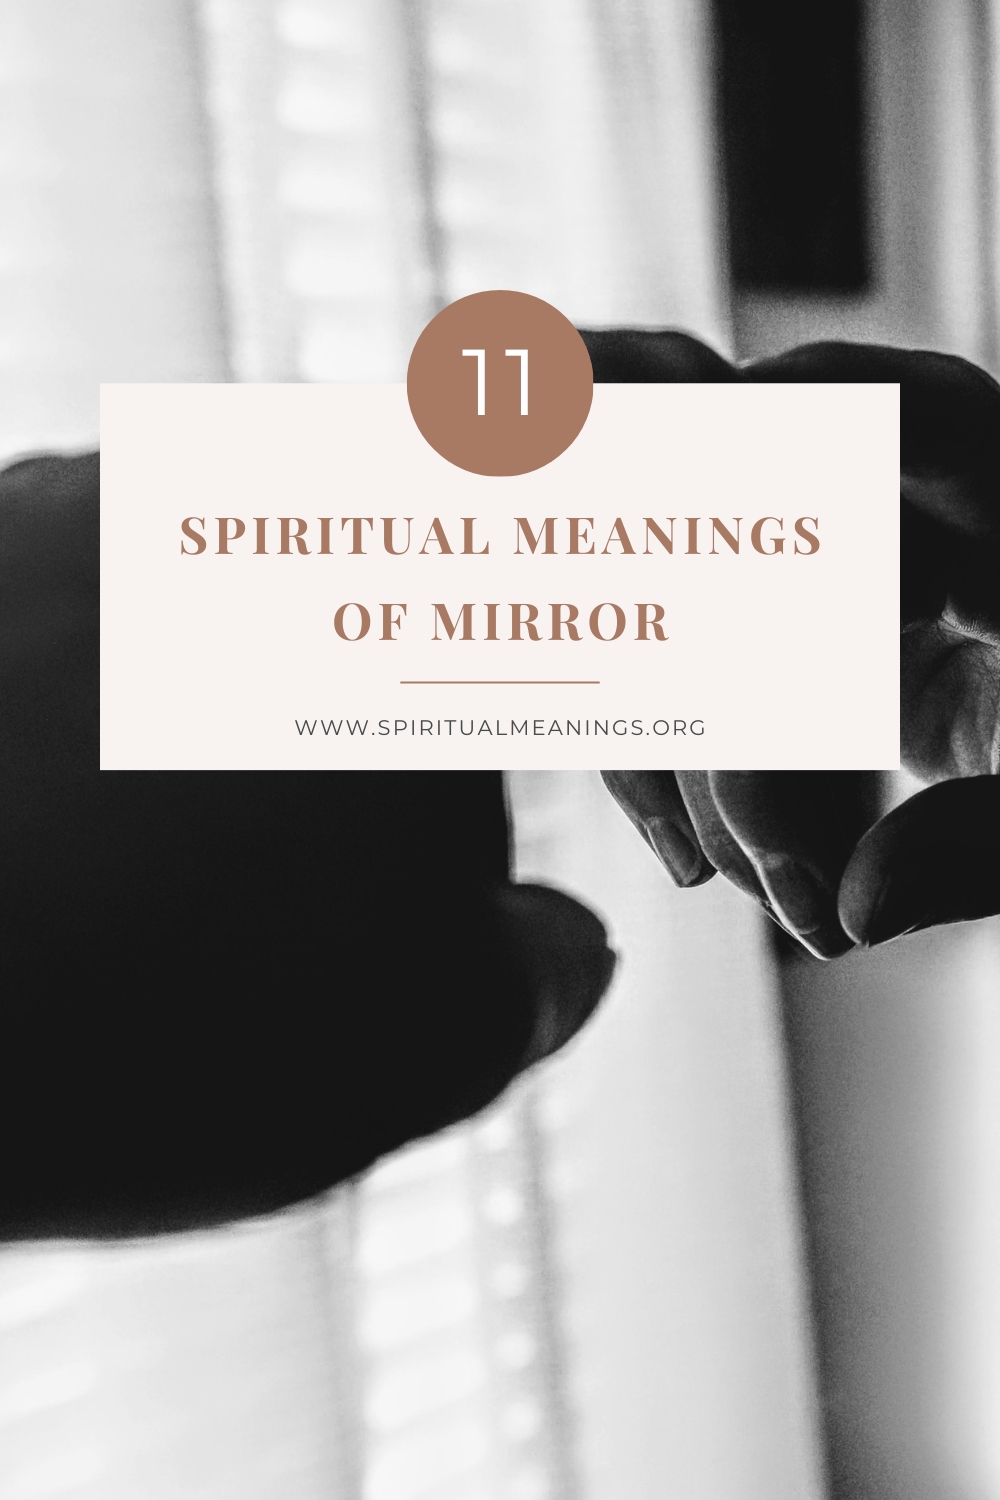 MIRRORS ARE EVIL! Search for the Mirror of Erised